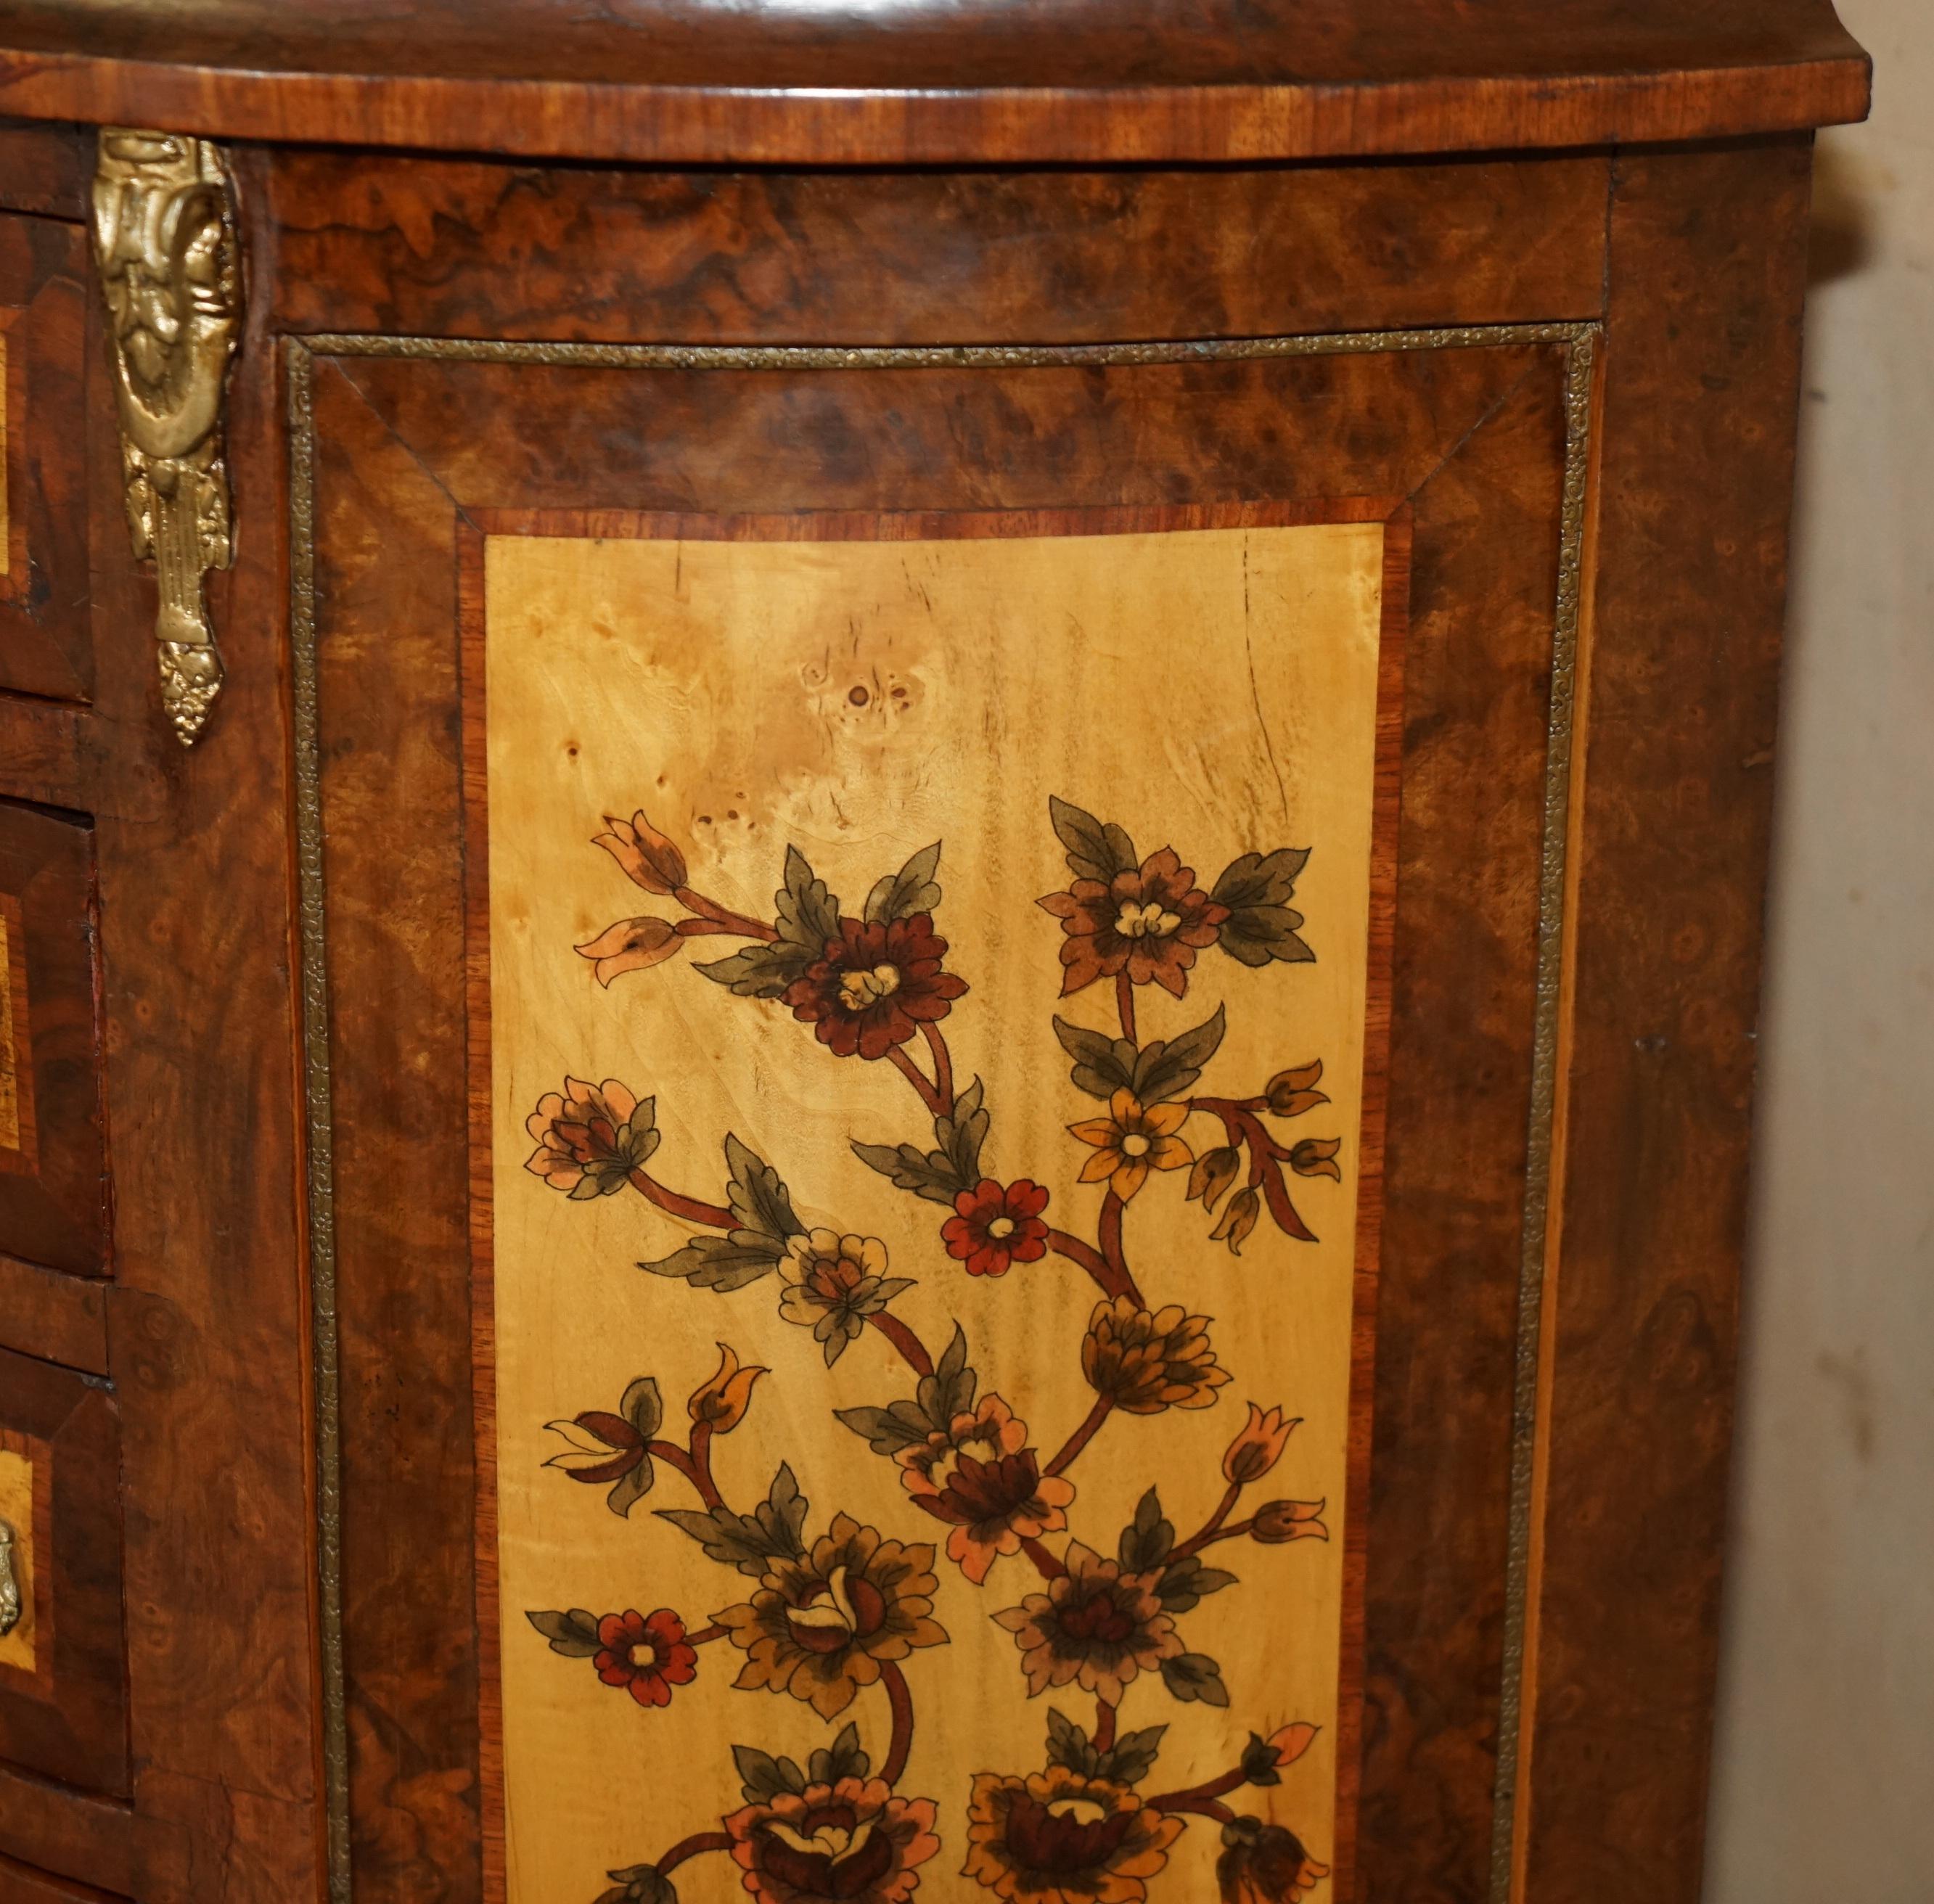 LOVELY FRENCH ViNTAGE PAINTED CIRCA 1940'S BURR WALNUT BRASS DEMI LUNE DRAWERS For Sale 4